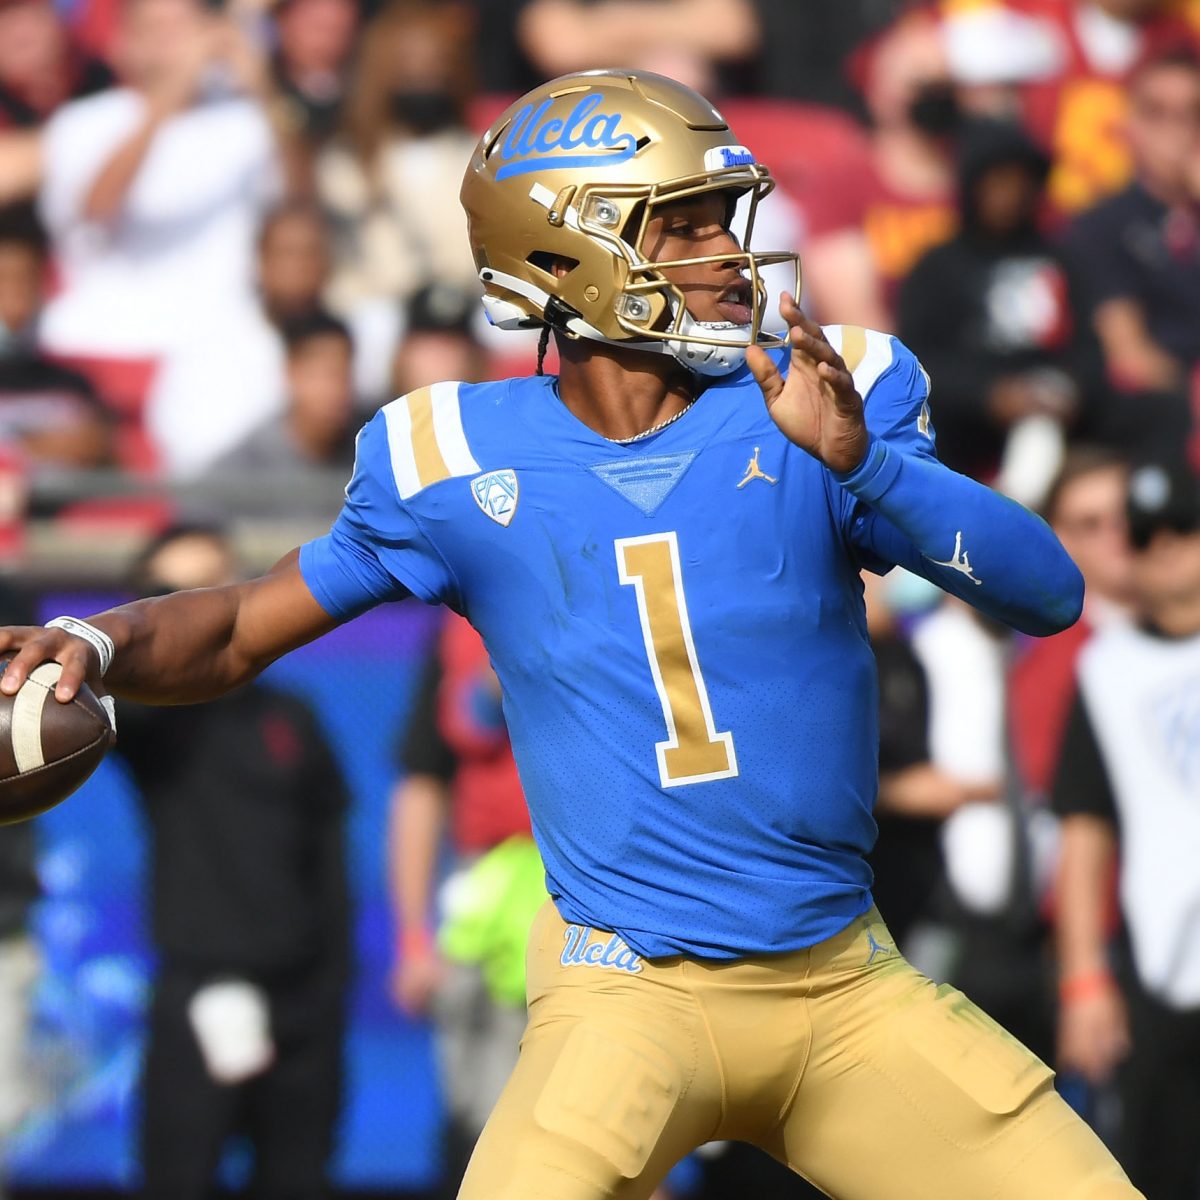 South Alabama vs. UCLA Prediction, Preview, and Odds - 9-17-2022